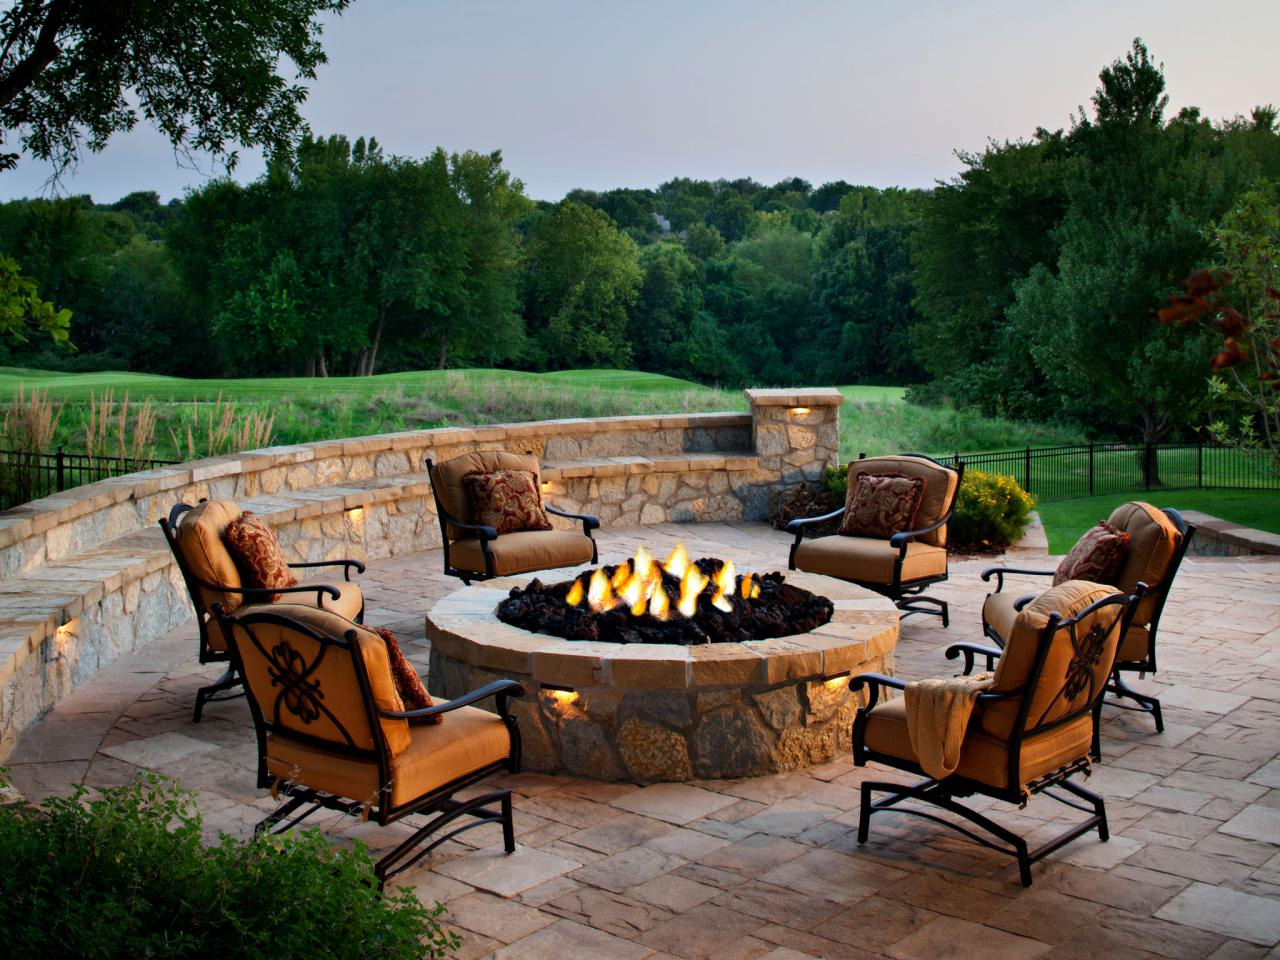 What Can You Do With An Outdoor Firepit?